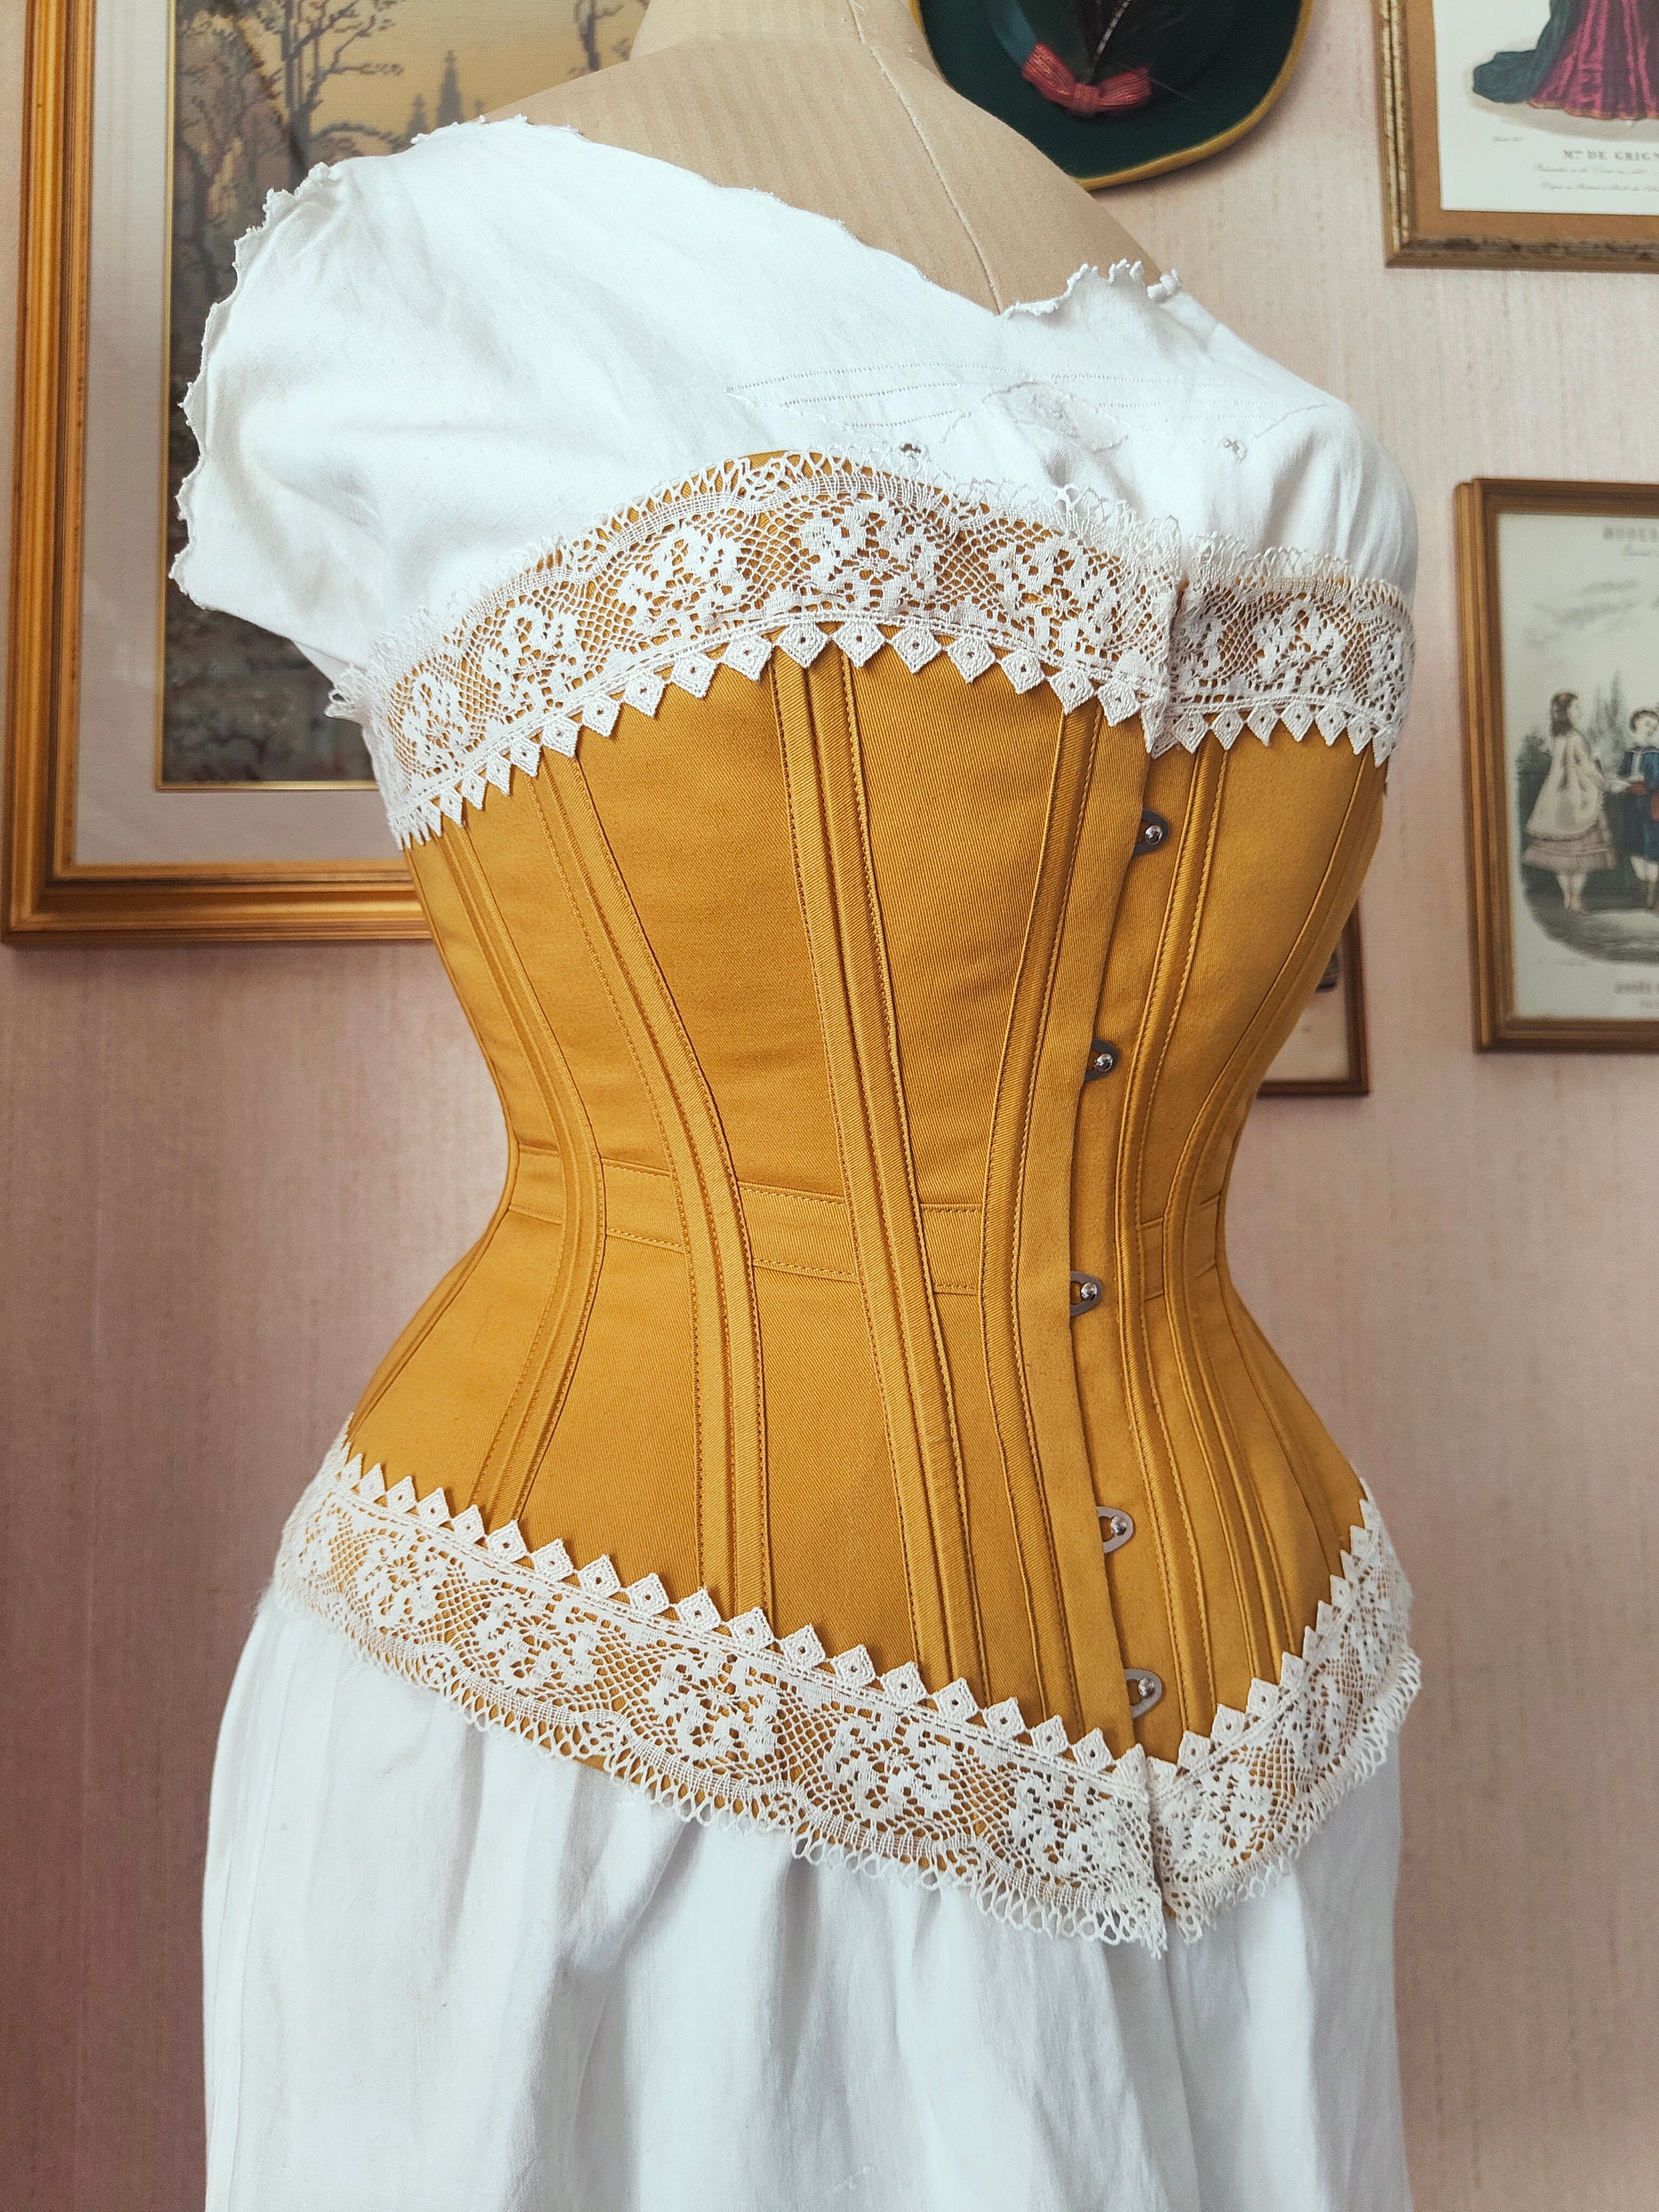 Vollers Corsets - Brand New Fan Lacing Corset from Vollers #FanLacing  #Corsetry #MadeInEngland  lacing